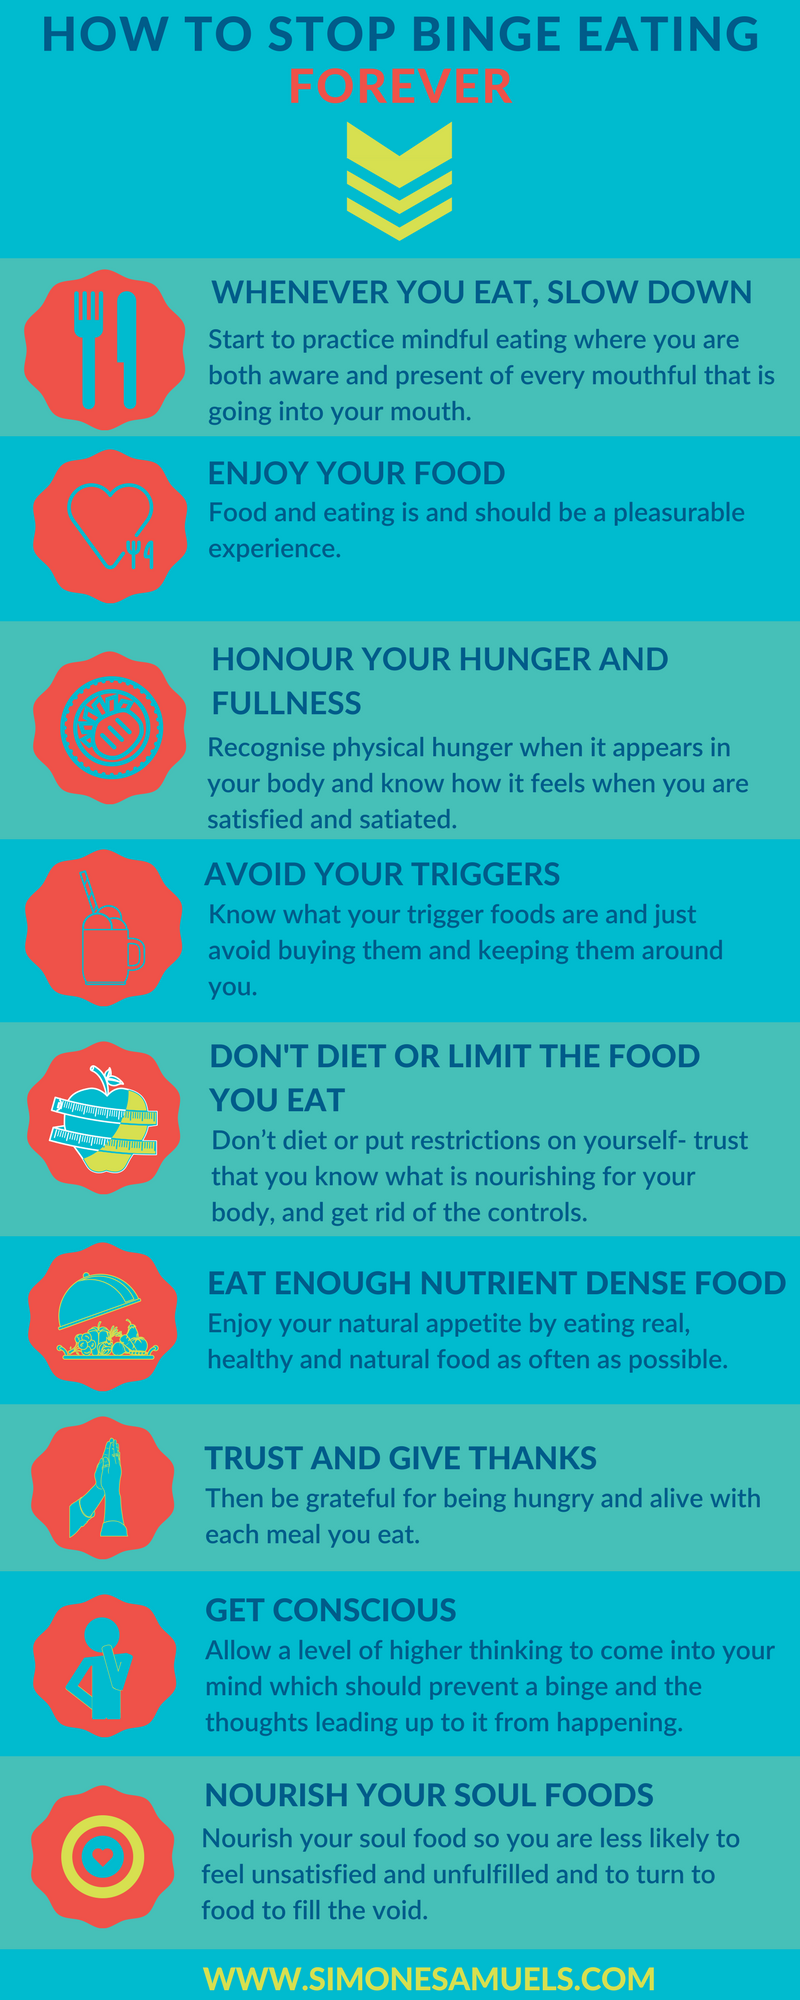 How to Stop Binge Eating Forever